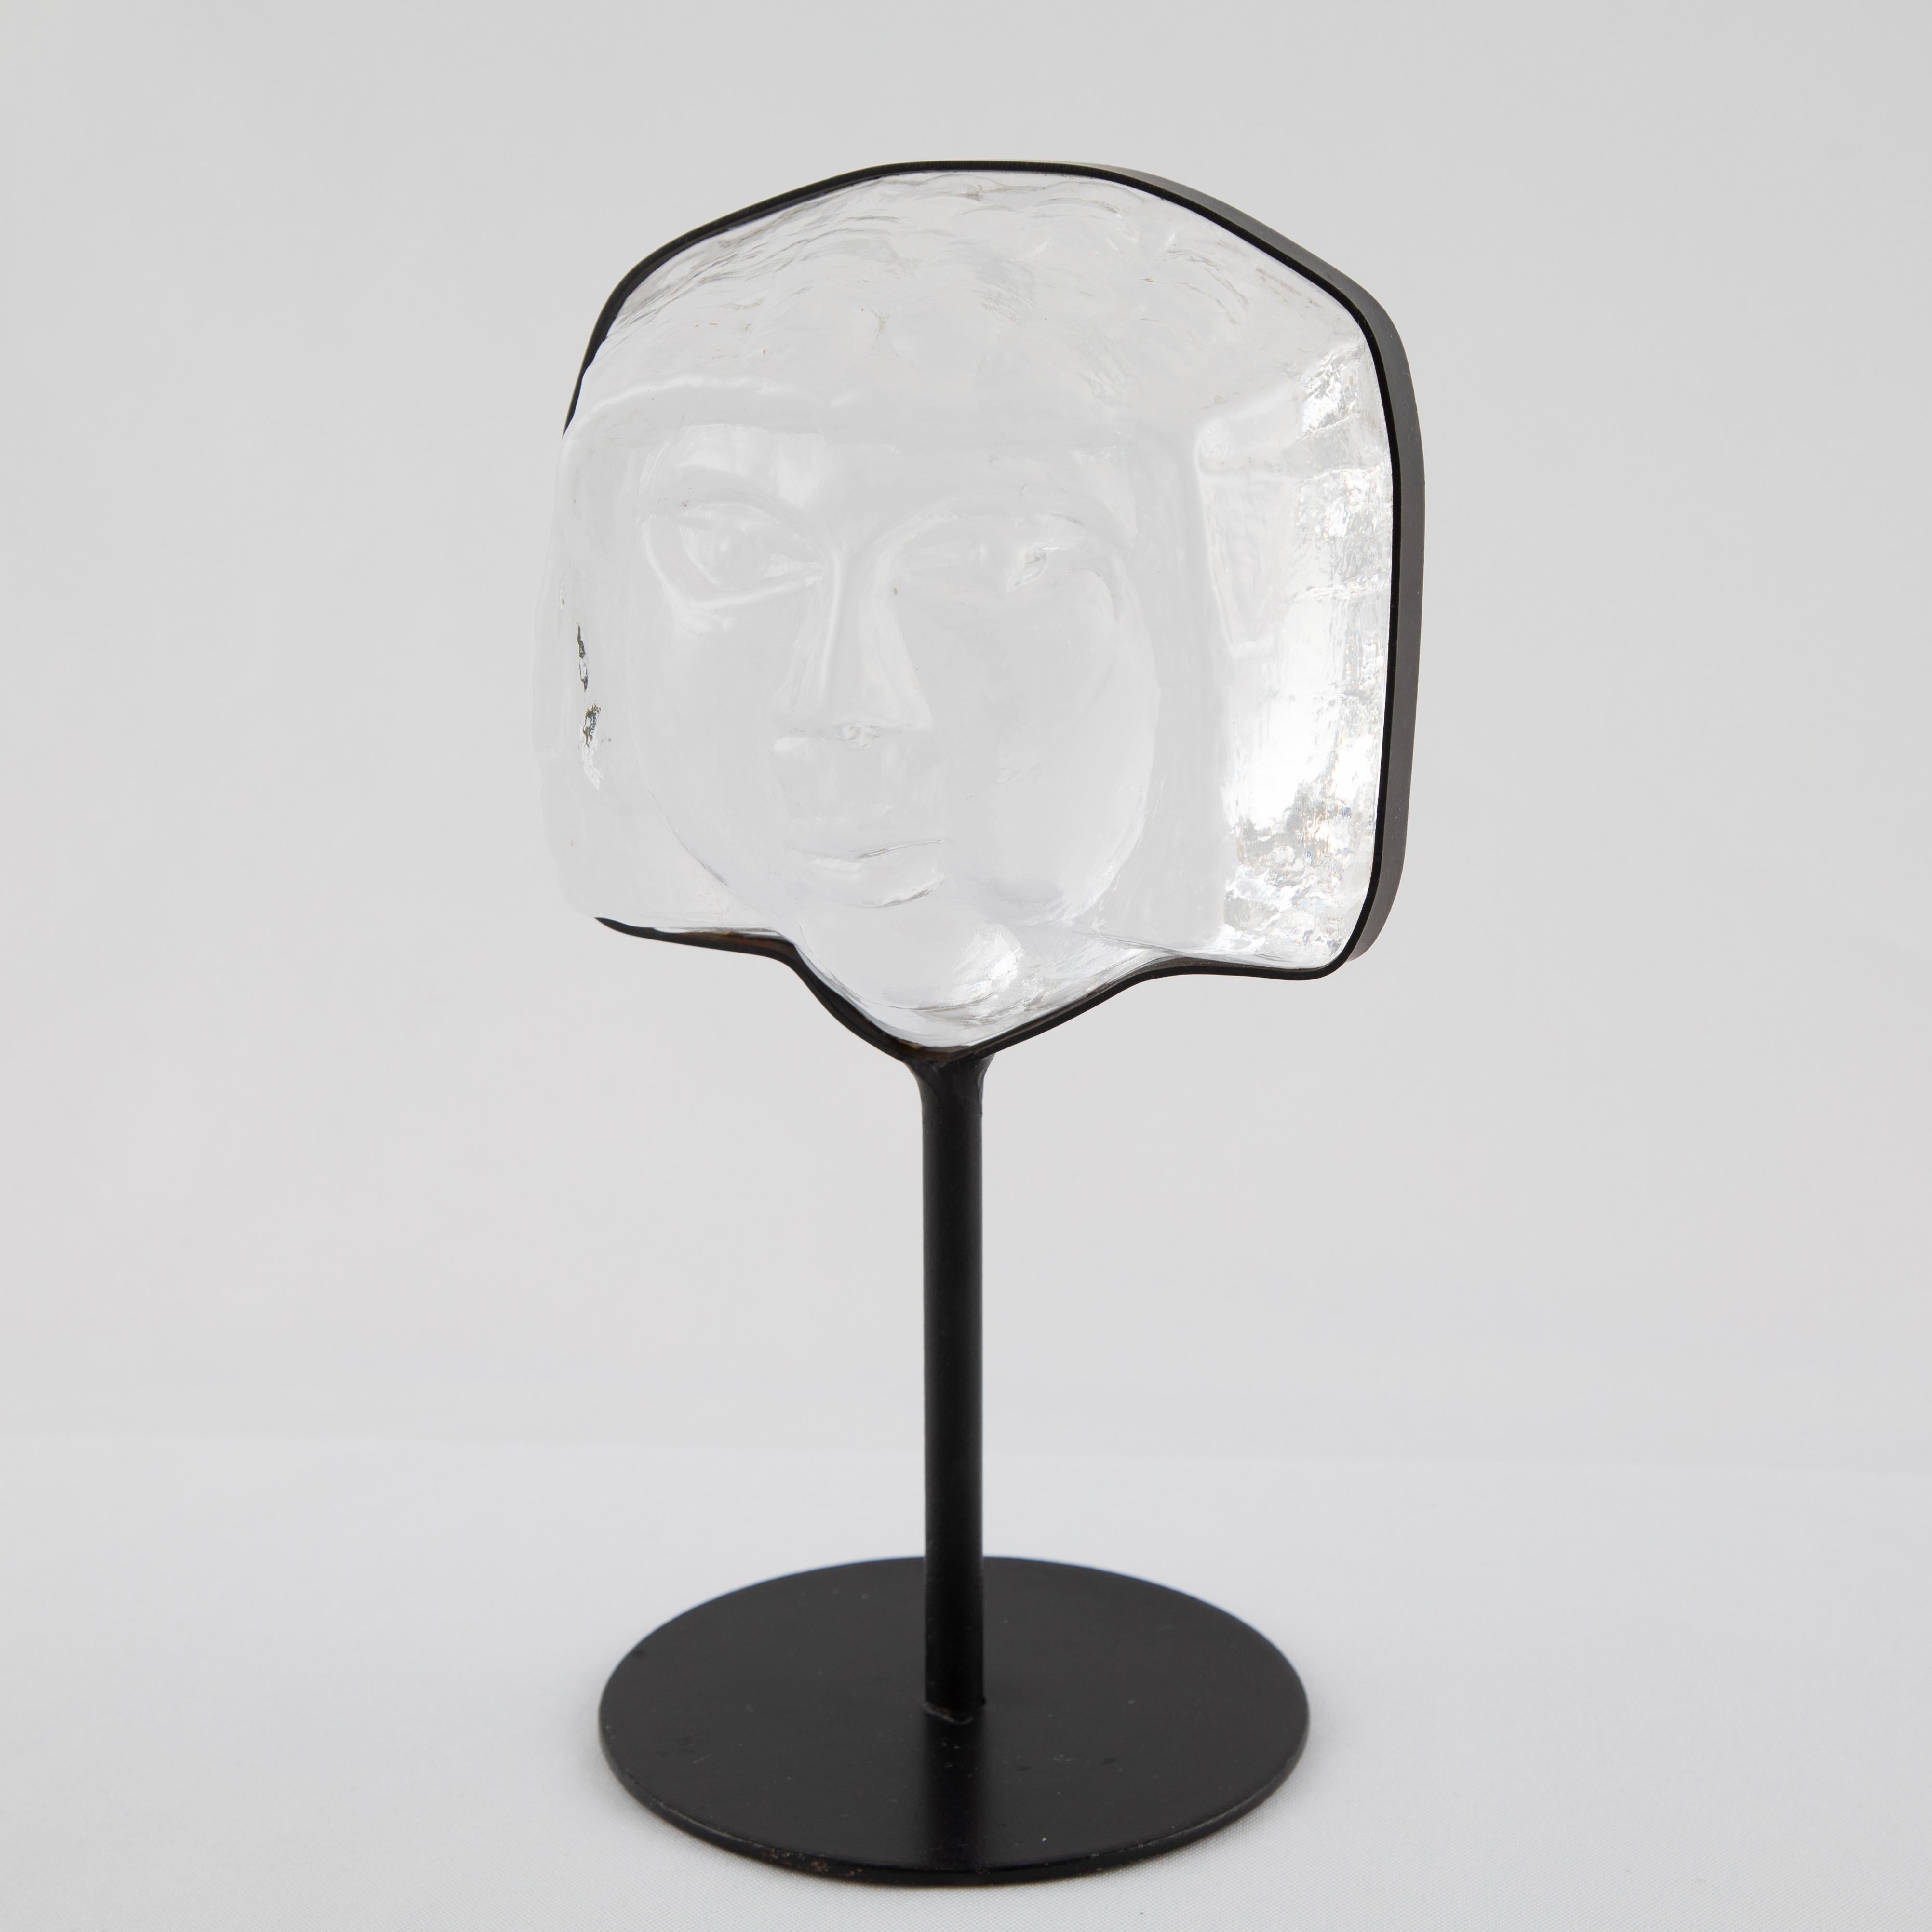 Thick, heavy art glass face sculpture supported by iron stand, by Erik Hoglund for Kosta Boda. Stamped 